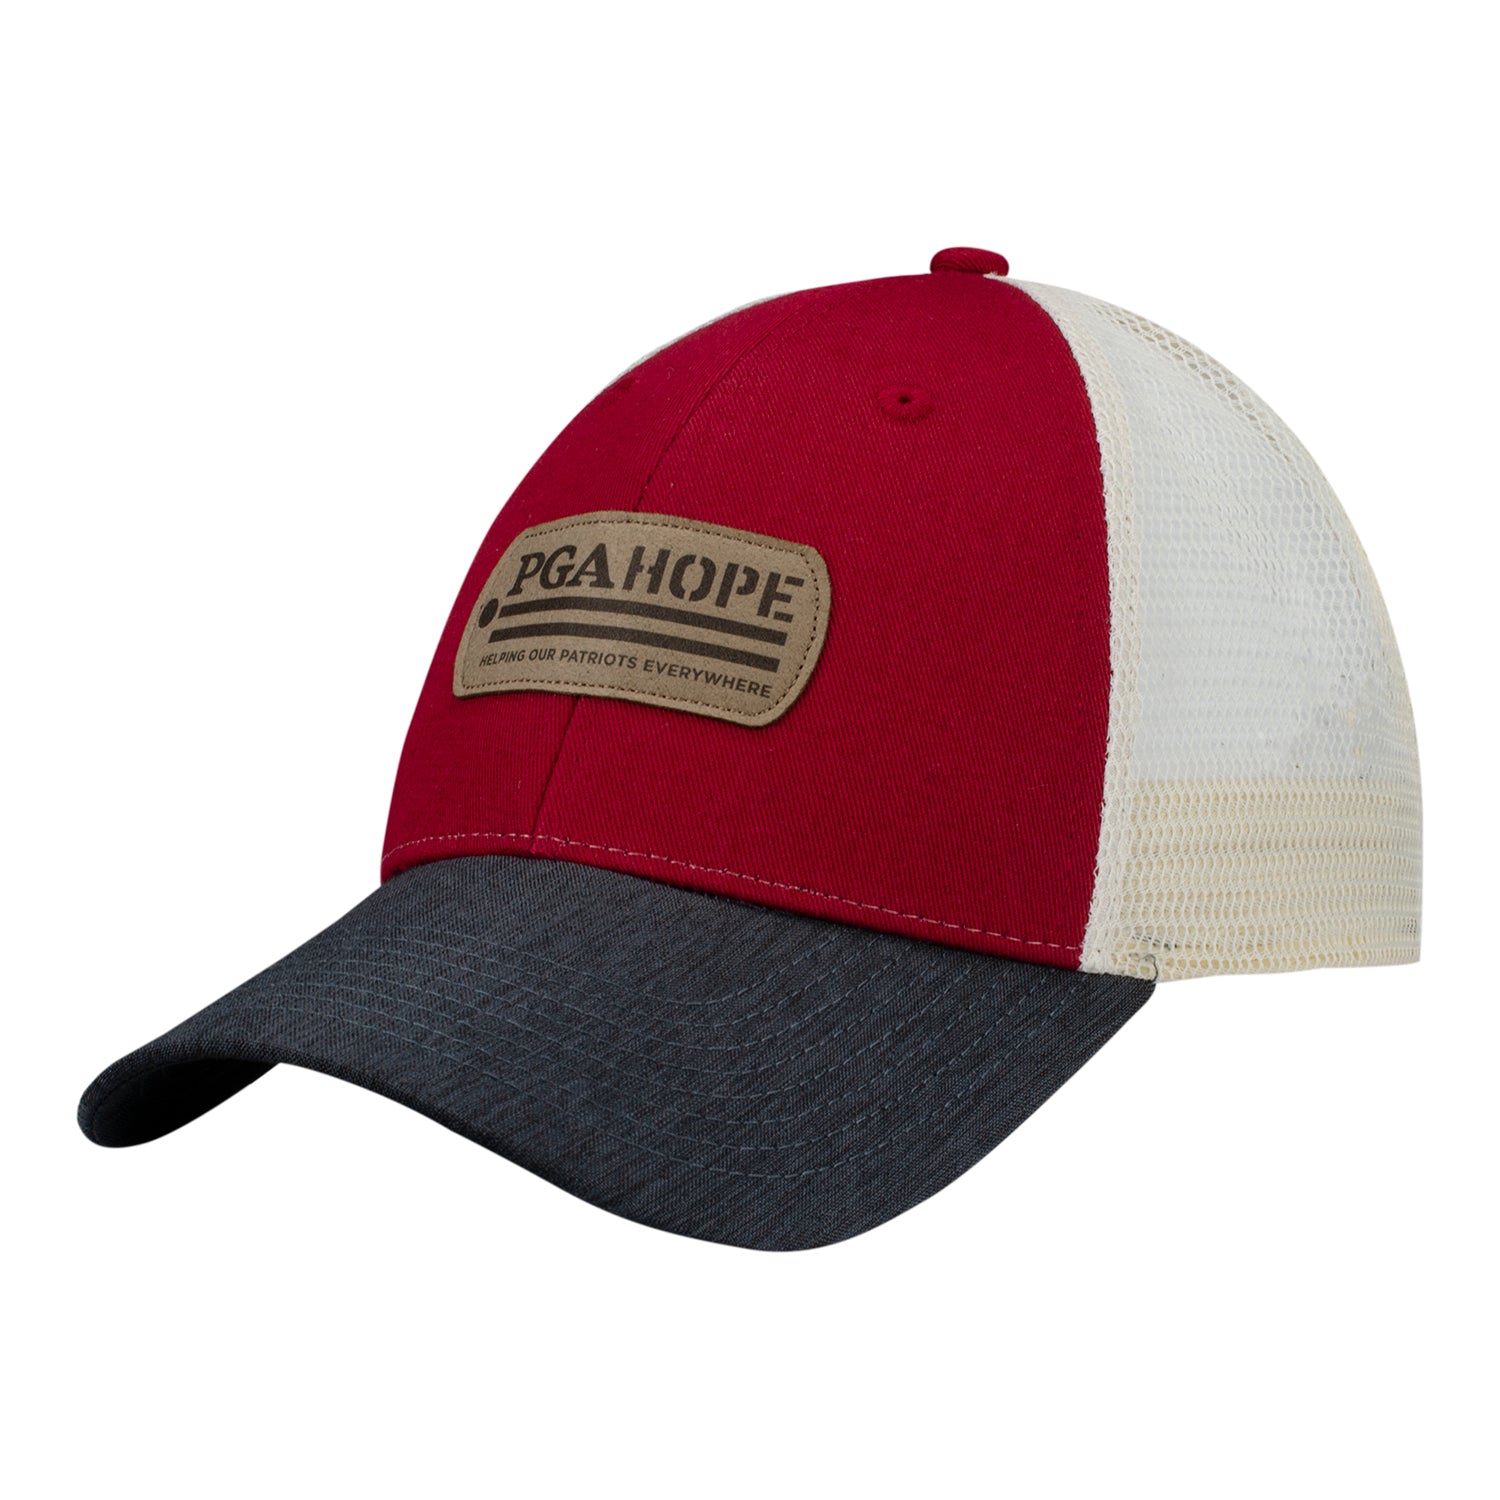 Ahead PGA HOPE Classic Fit Structured Meshback Hat in Red & White